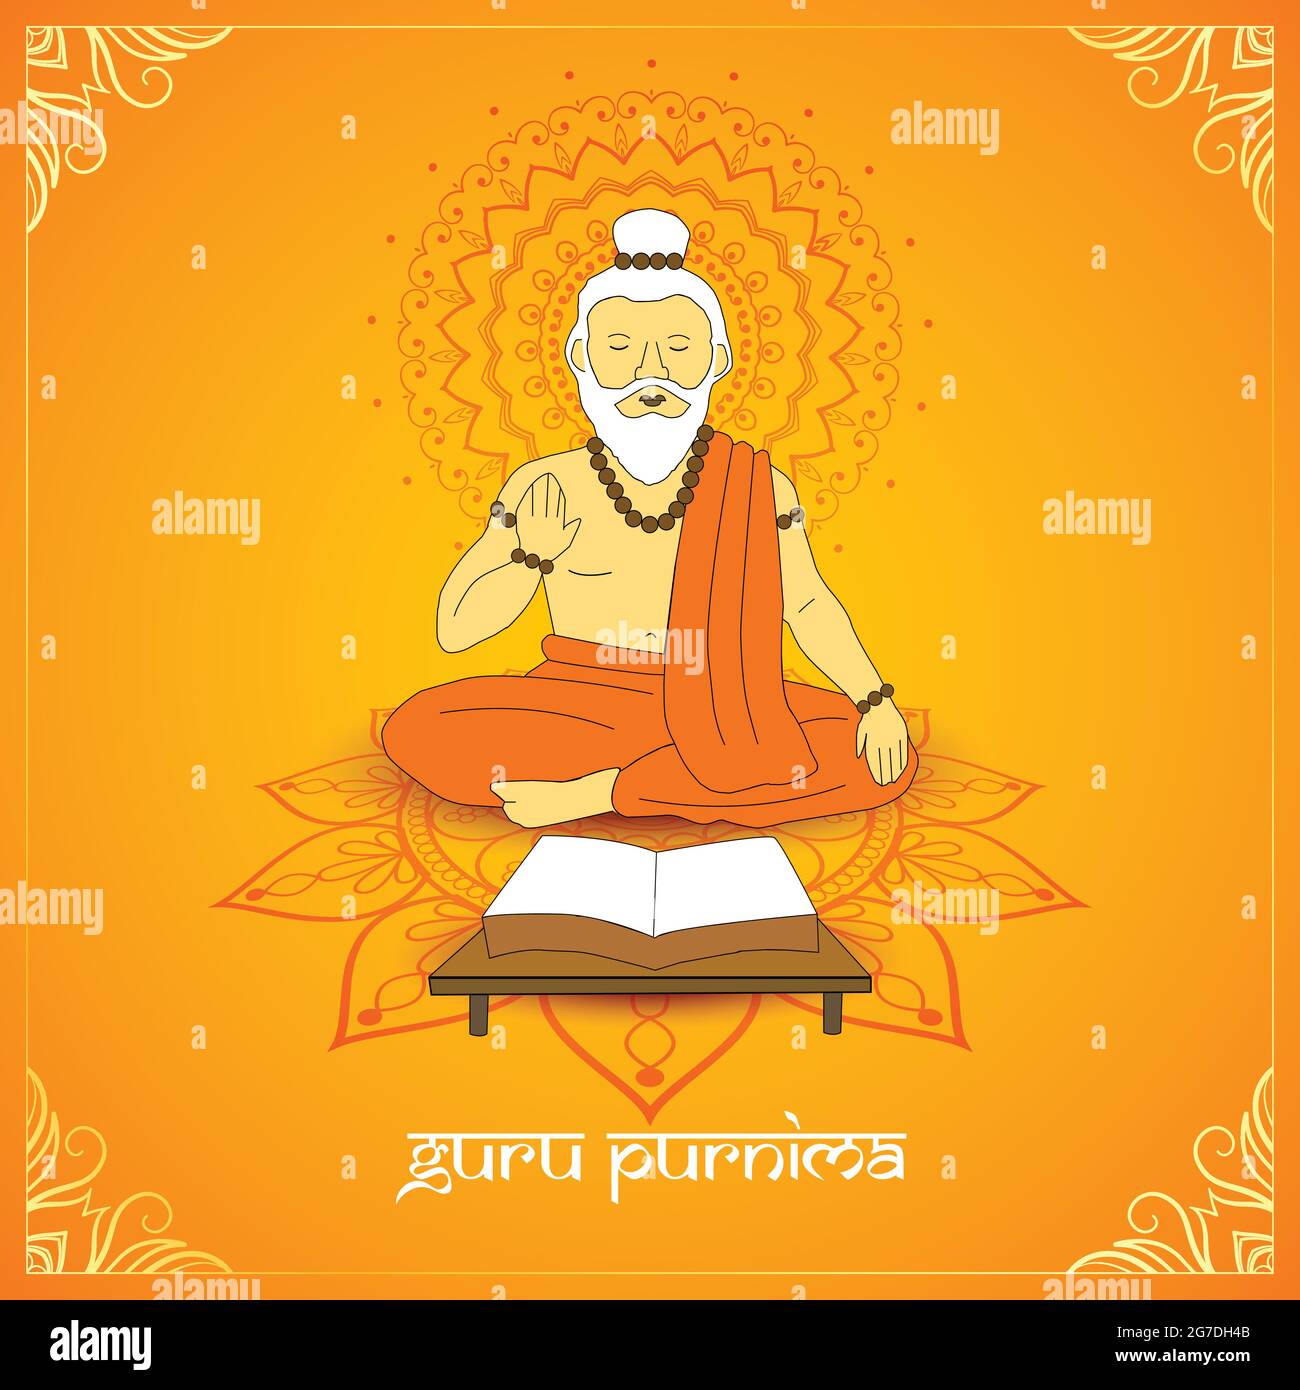 Poster of celebration of Guru Purnima. In this poster Maharshi sitting on the floor and blessing the world and read the book. Stock Vector